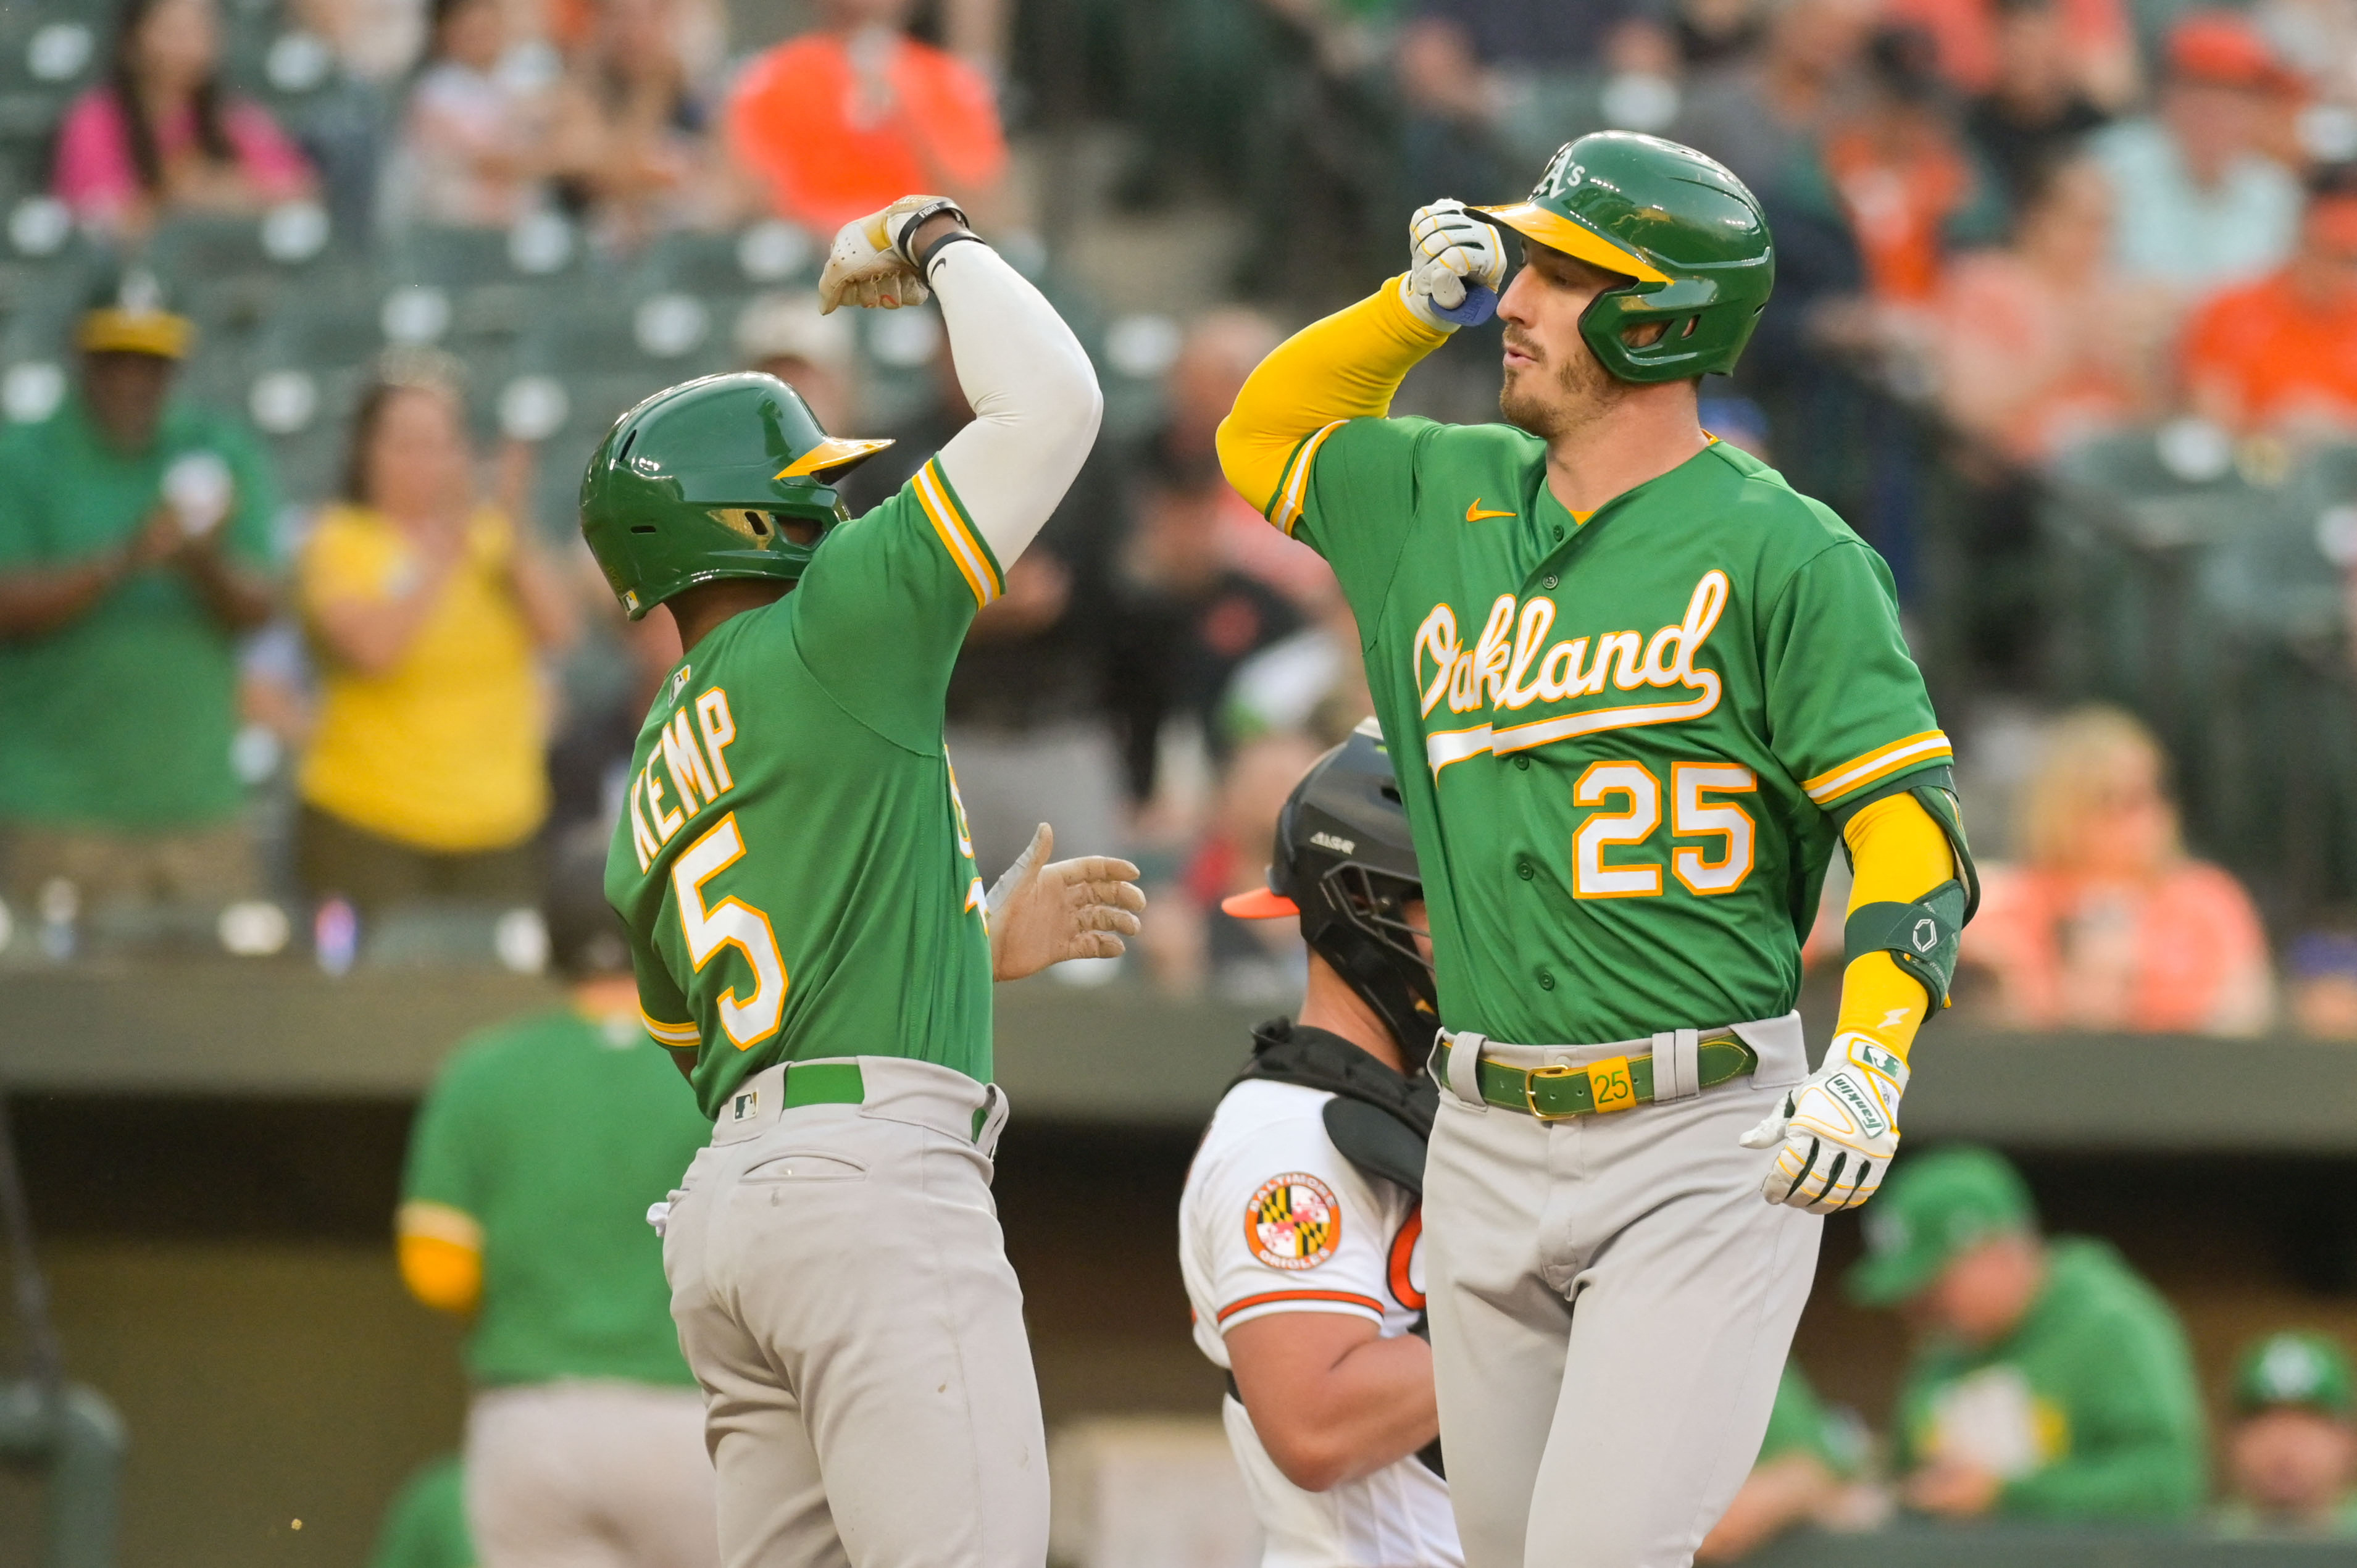 Orioles road woes drag on with 6-4 loss to Athletics - Camden Chat